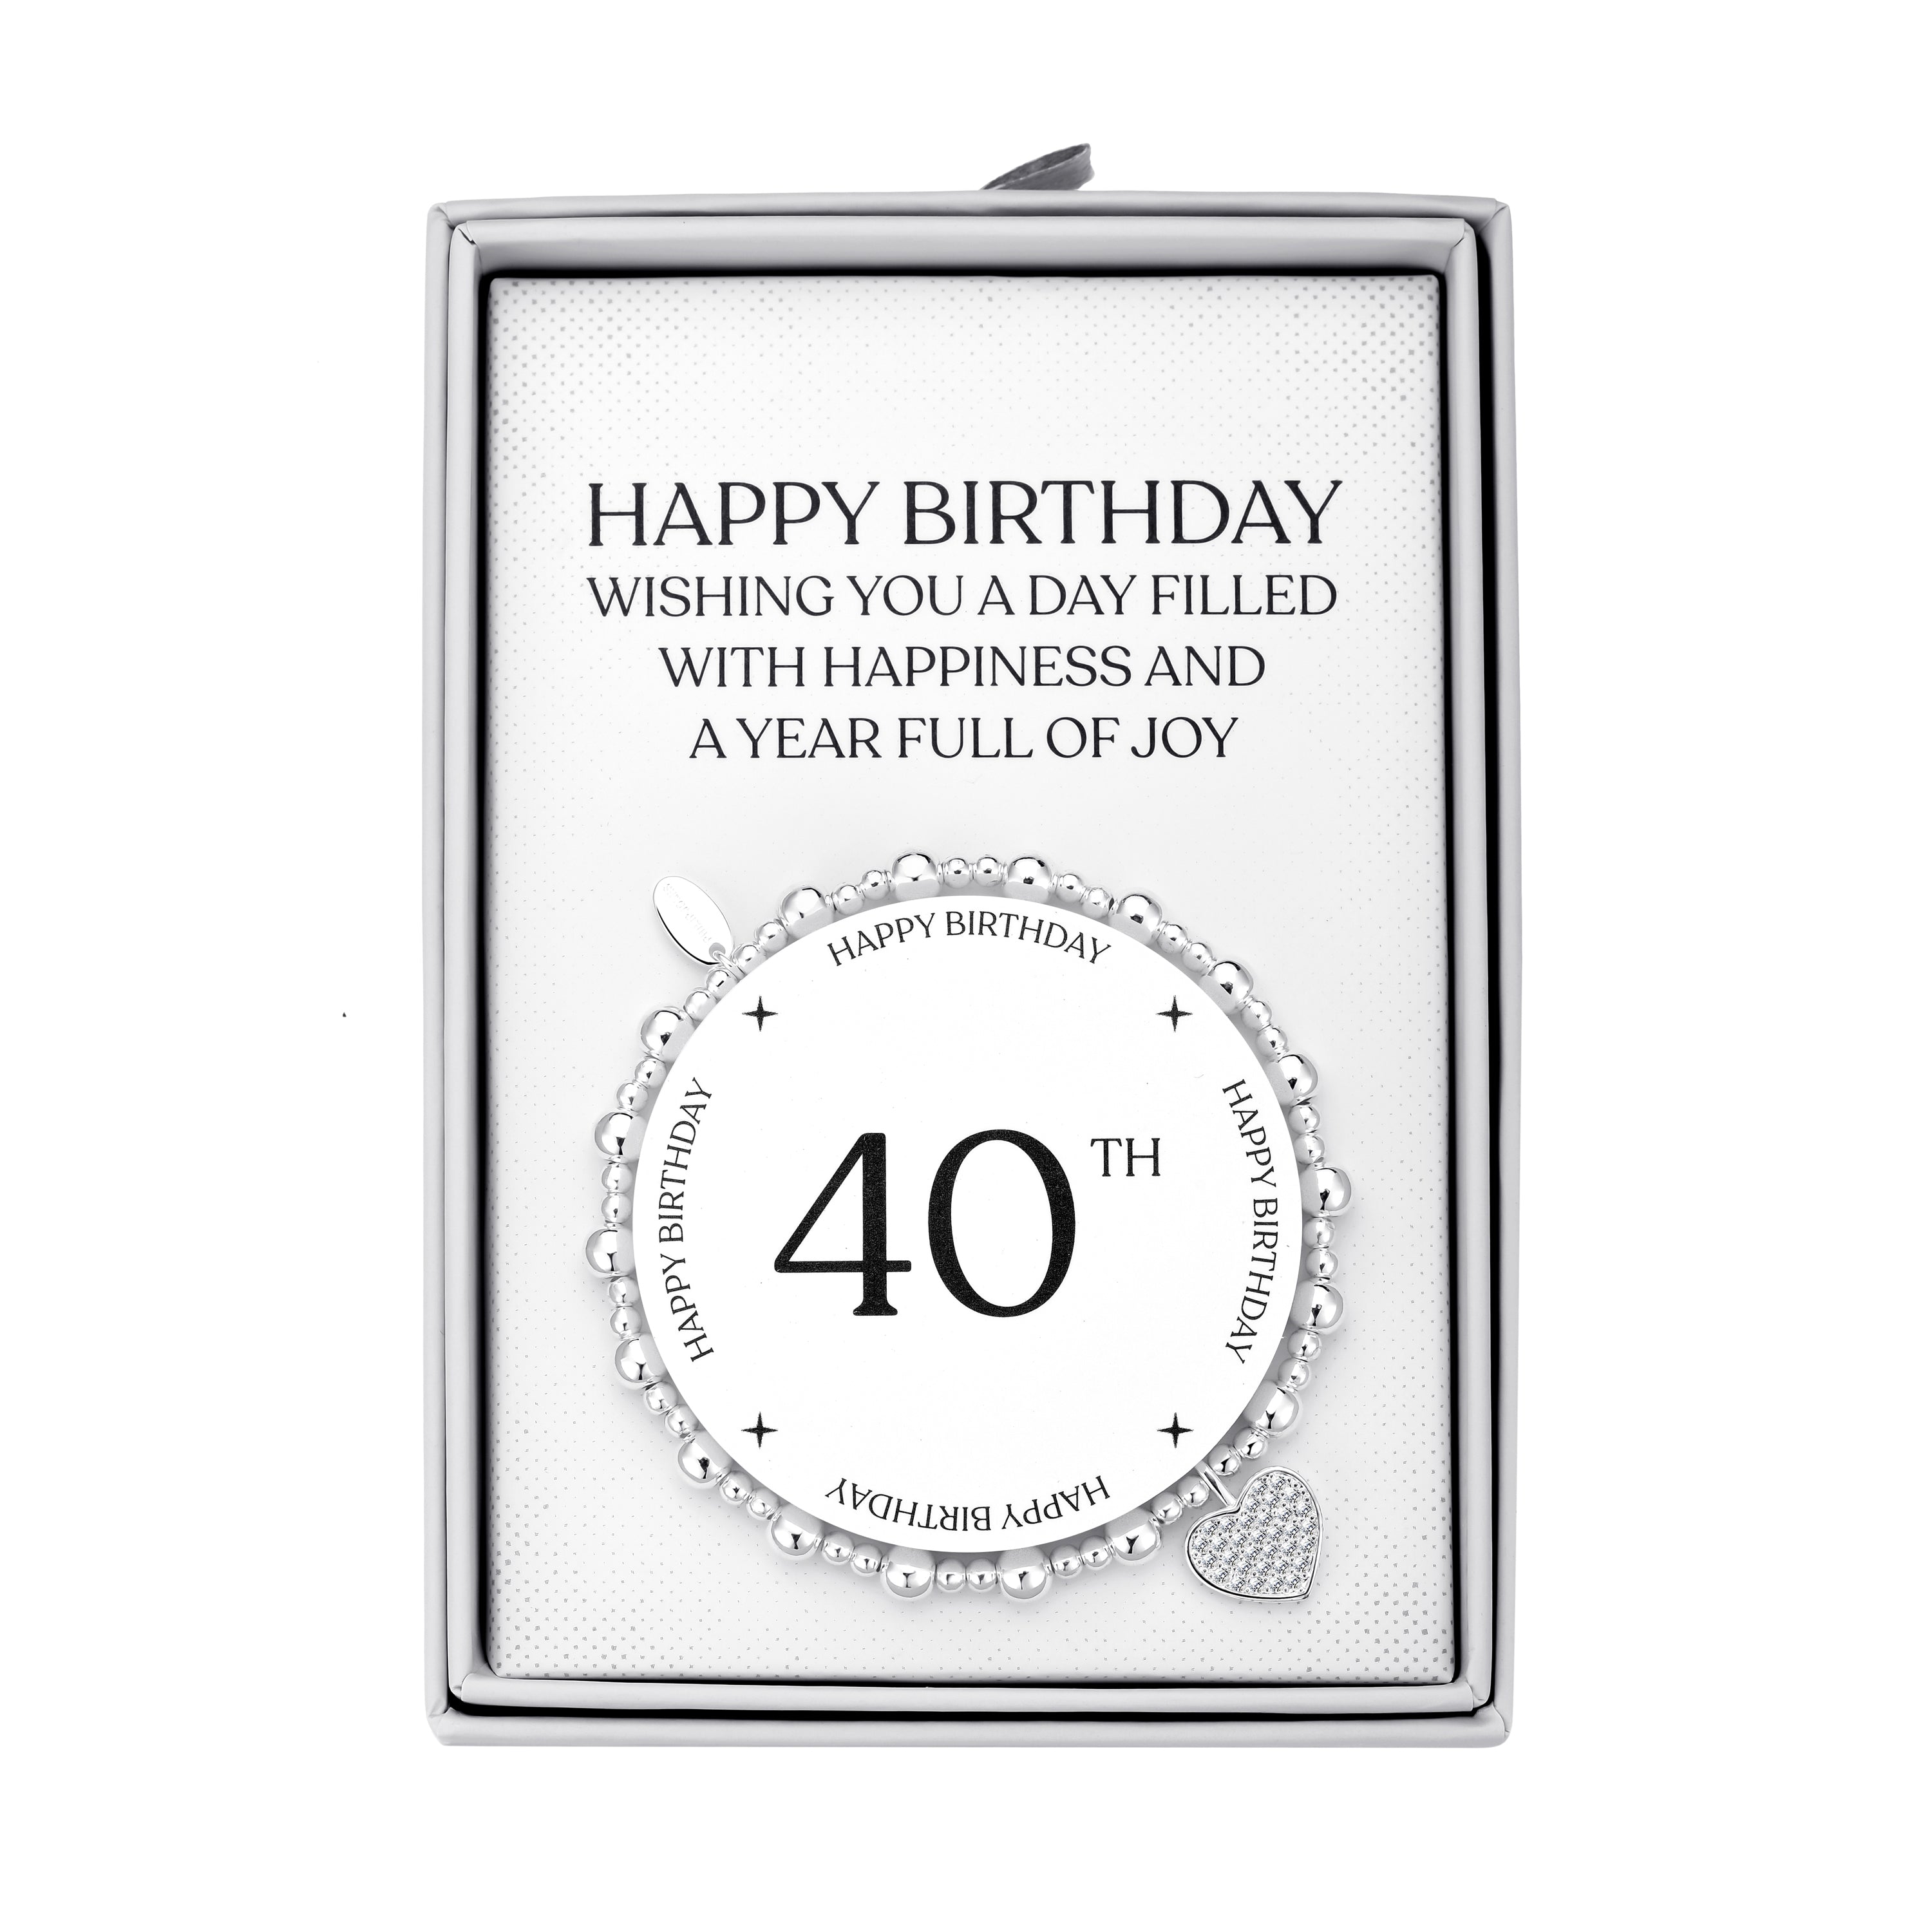 40th Birthday Heart Charm Stretch Bracelet with Quote Gift Box by Philip Jones Jewellery